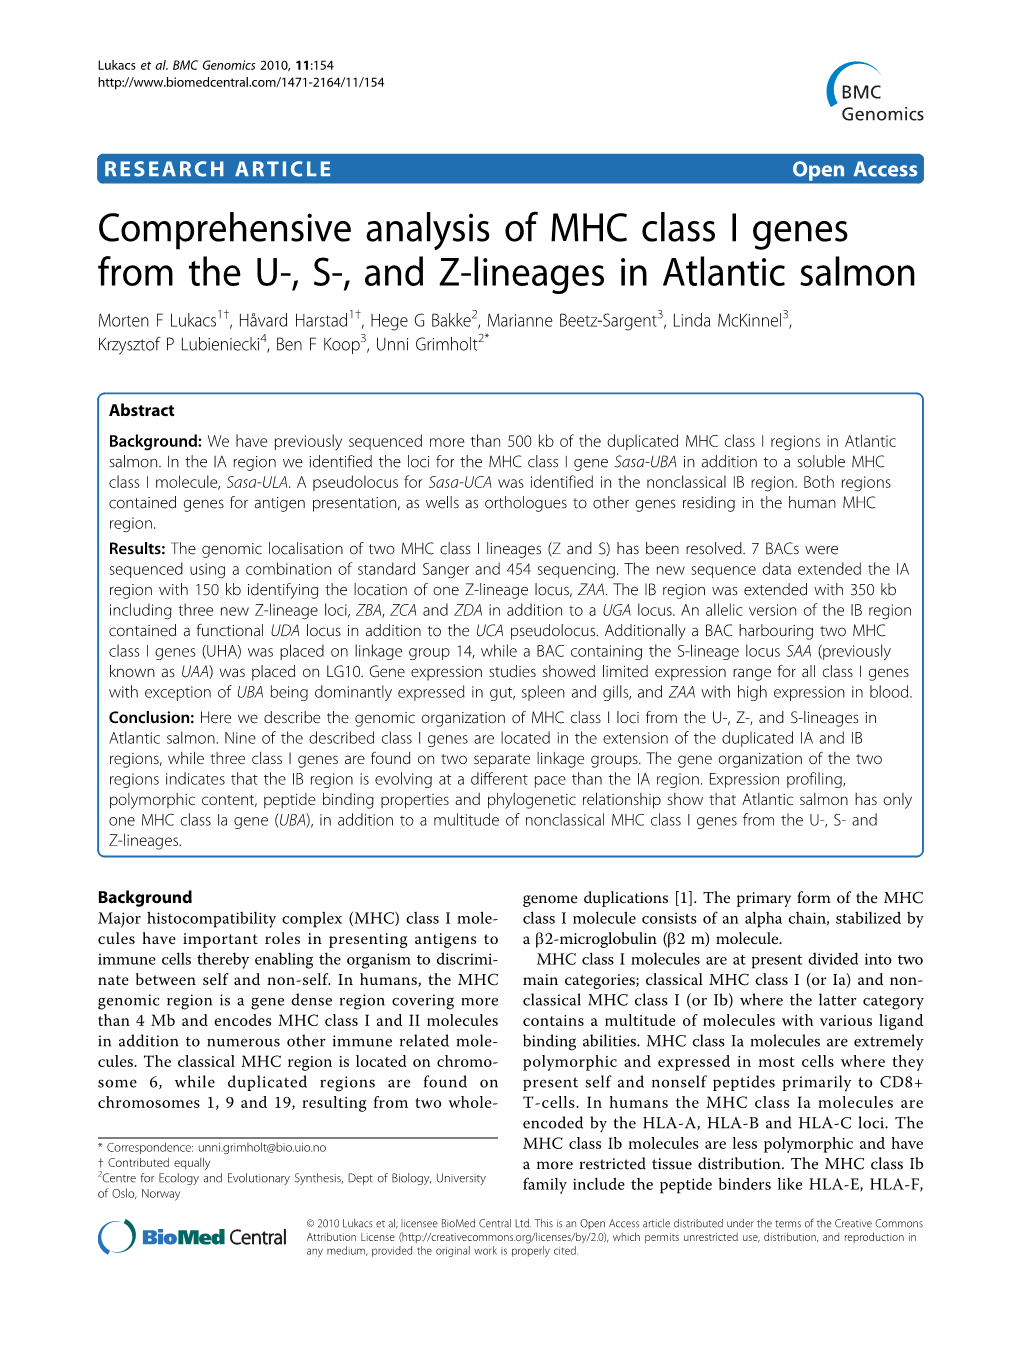 Comprehensive Analysis of MHC Class I Genes from the U-, S-, and Z